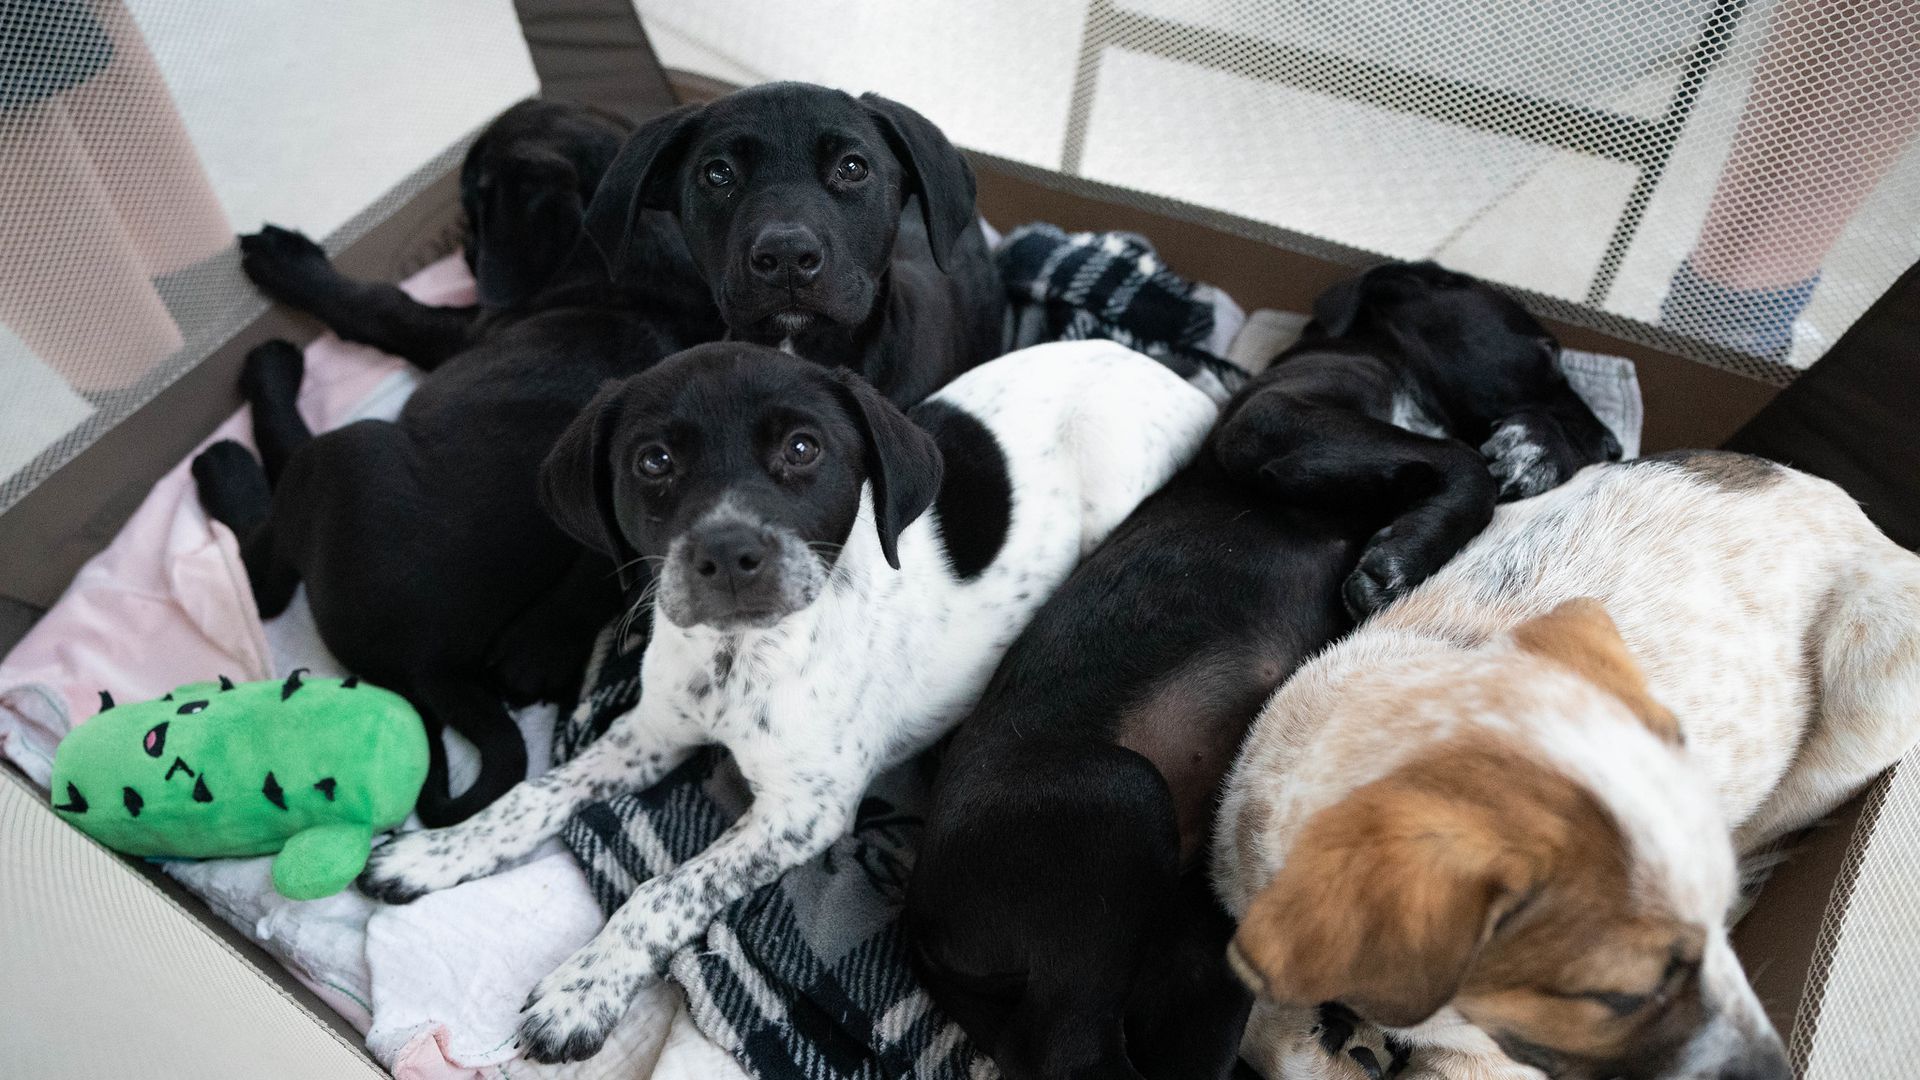 View from above of a playpen, where five small puppies are all heaped together. One, with a white coat but mostly-black fur on their face, makes direct eye contact with the camera.